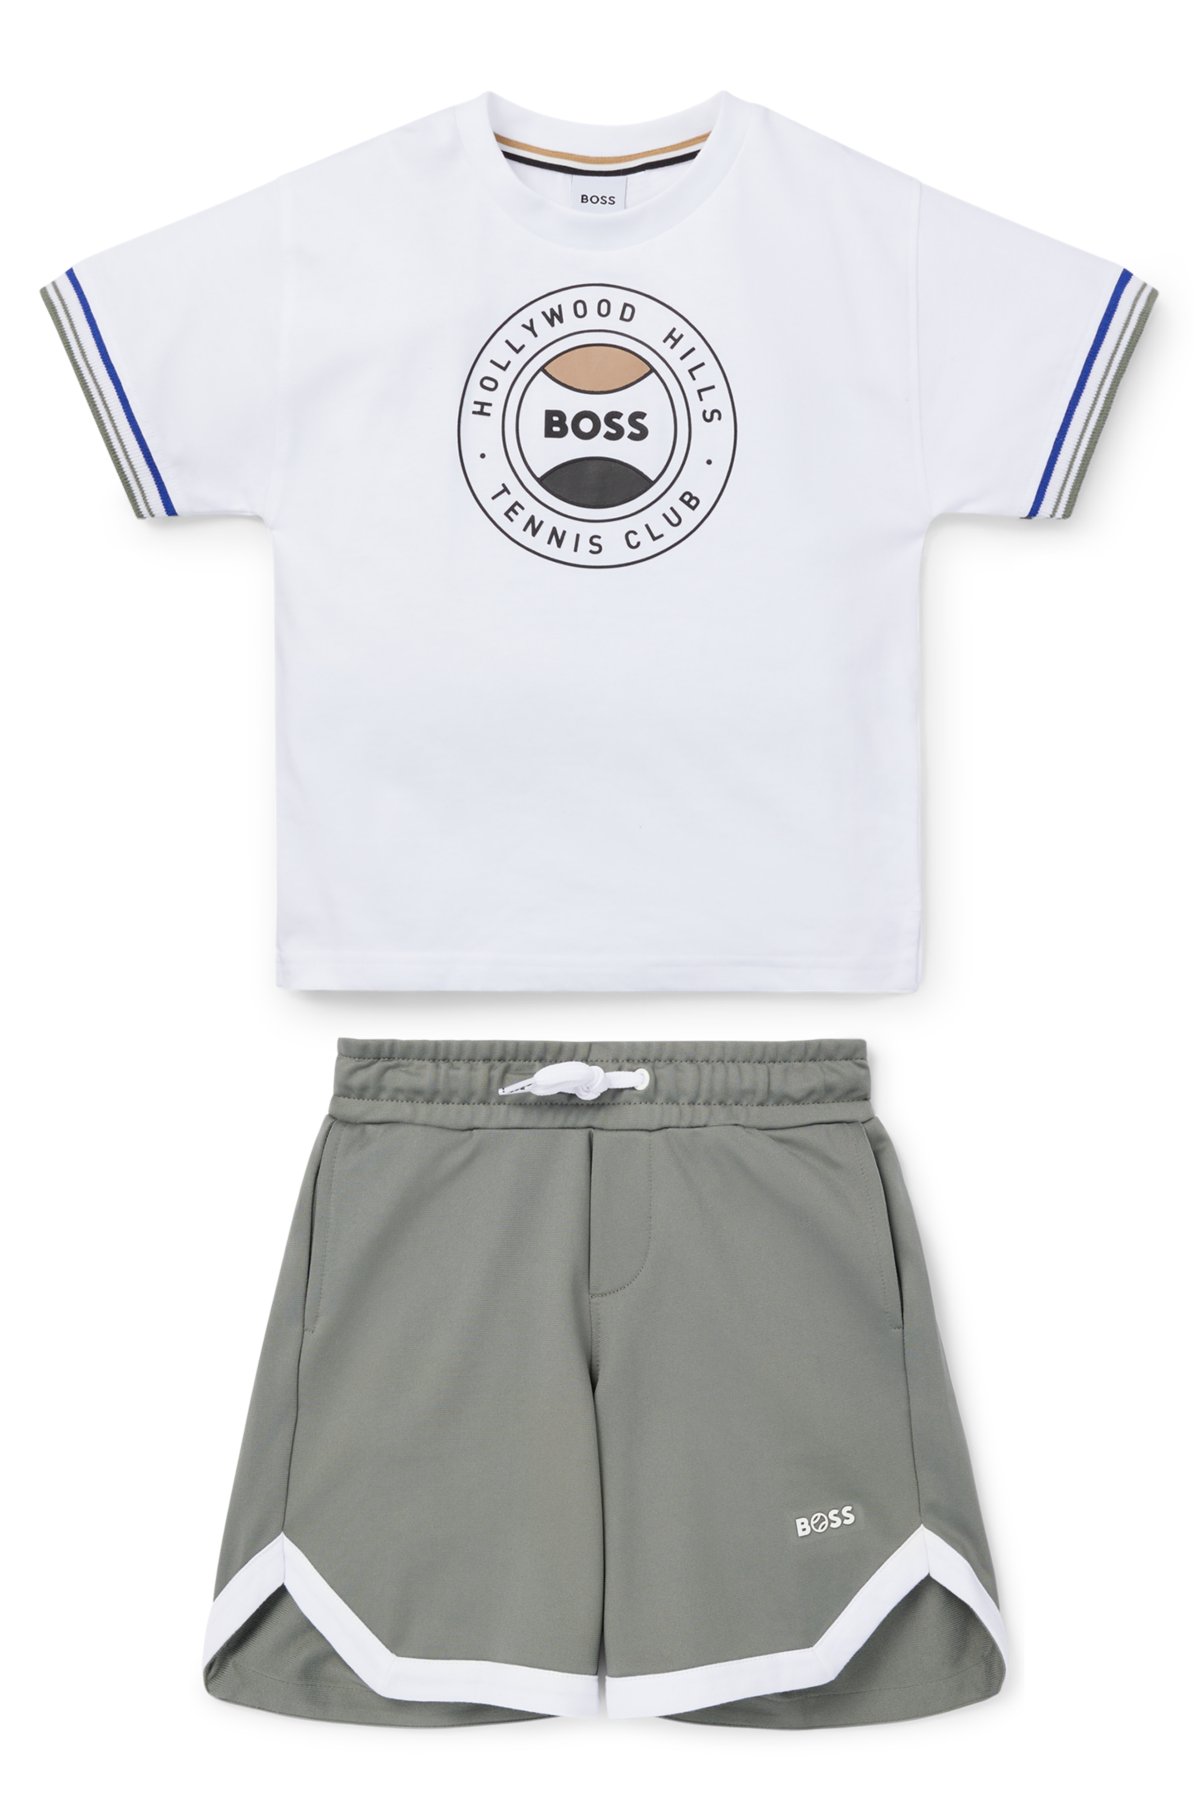 BOSS - Kids\' shorts artwork and set with tennnis-inspired T-shirt